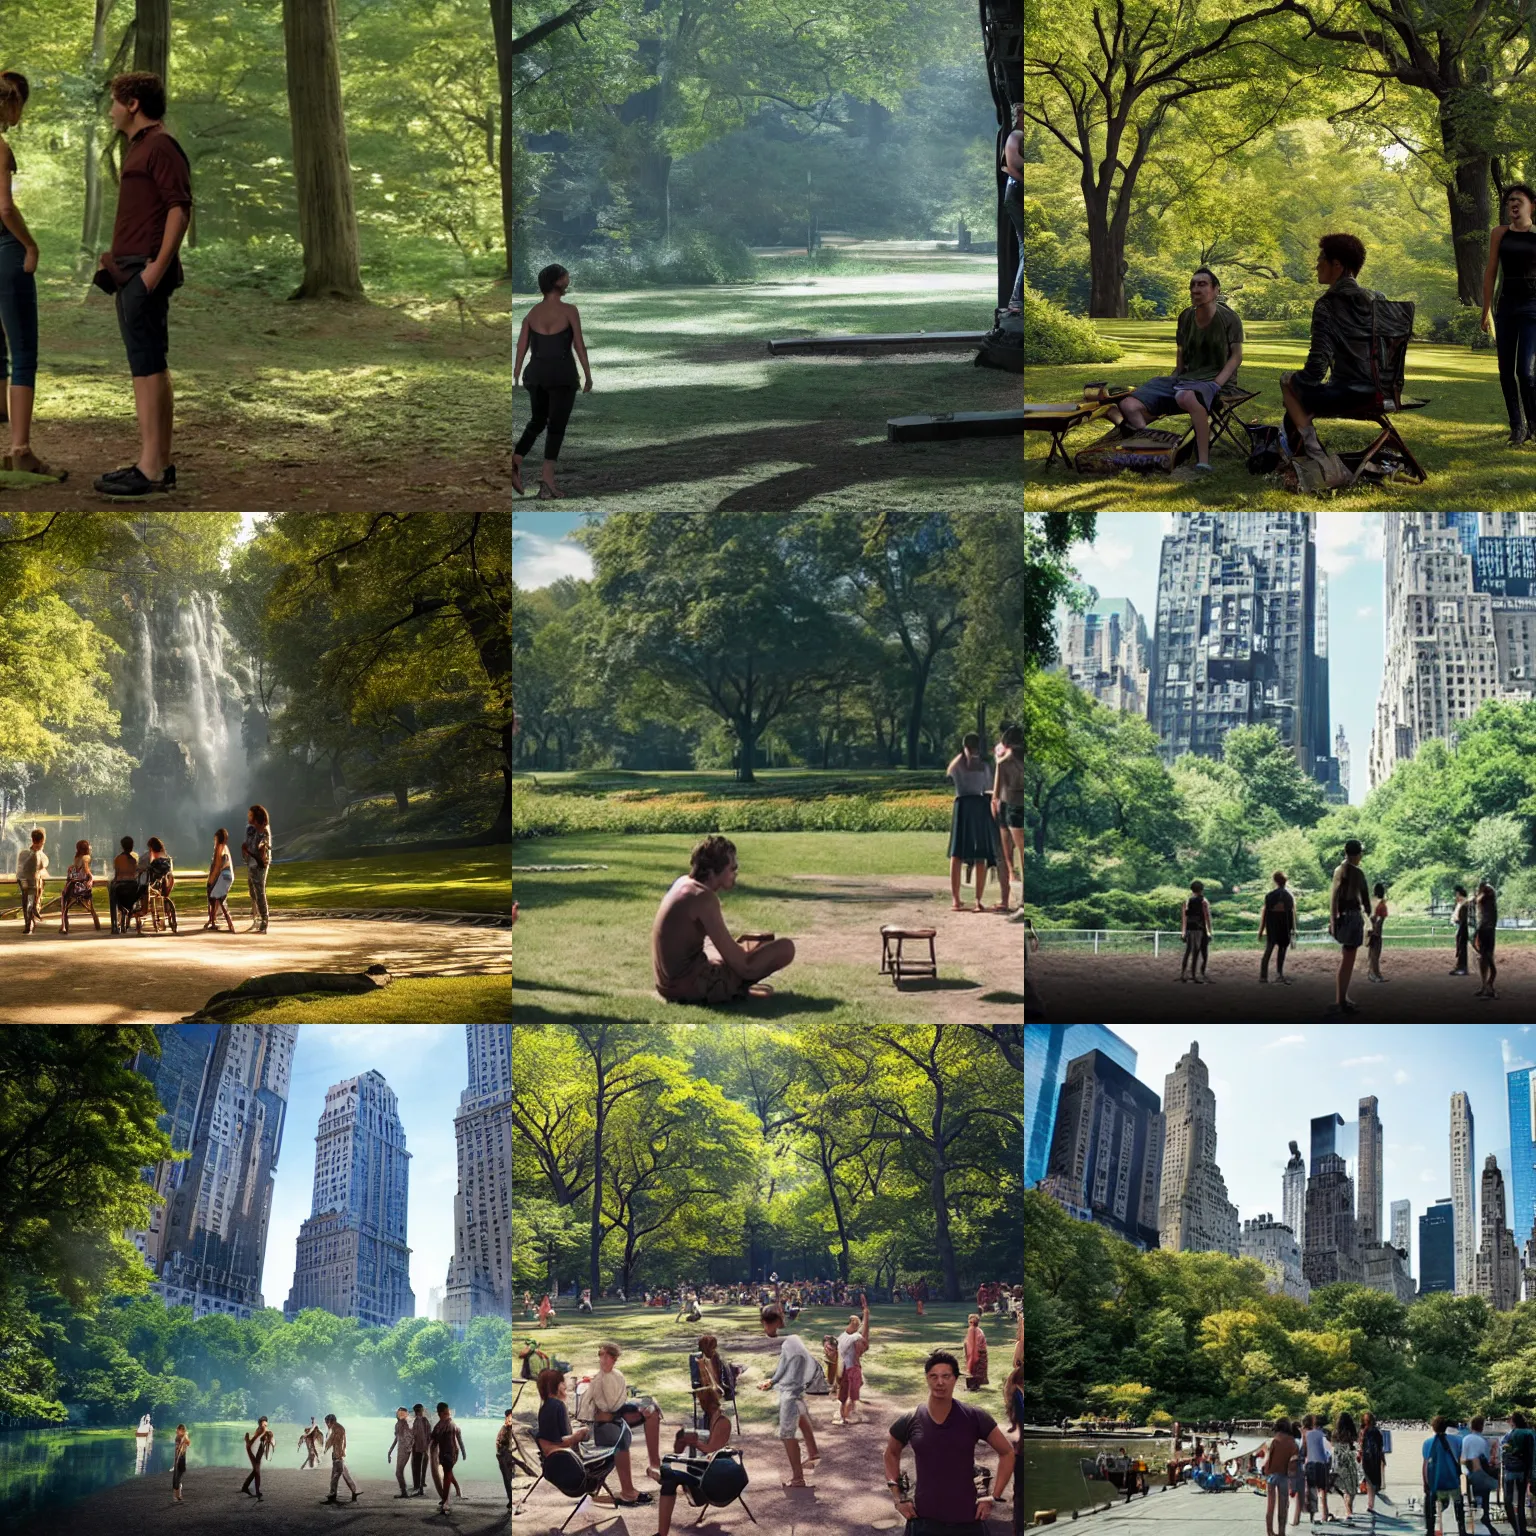 Prompt: Movie still of Central Park in the summer, The Expanse